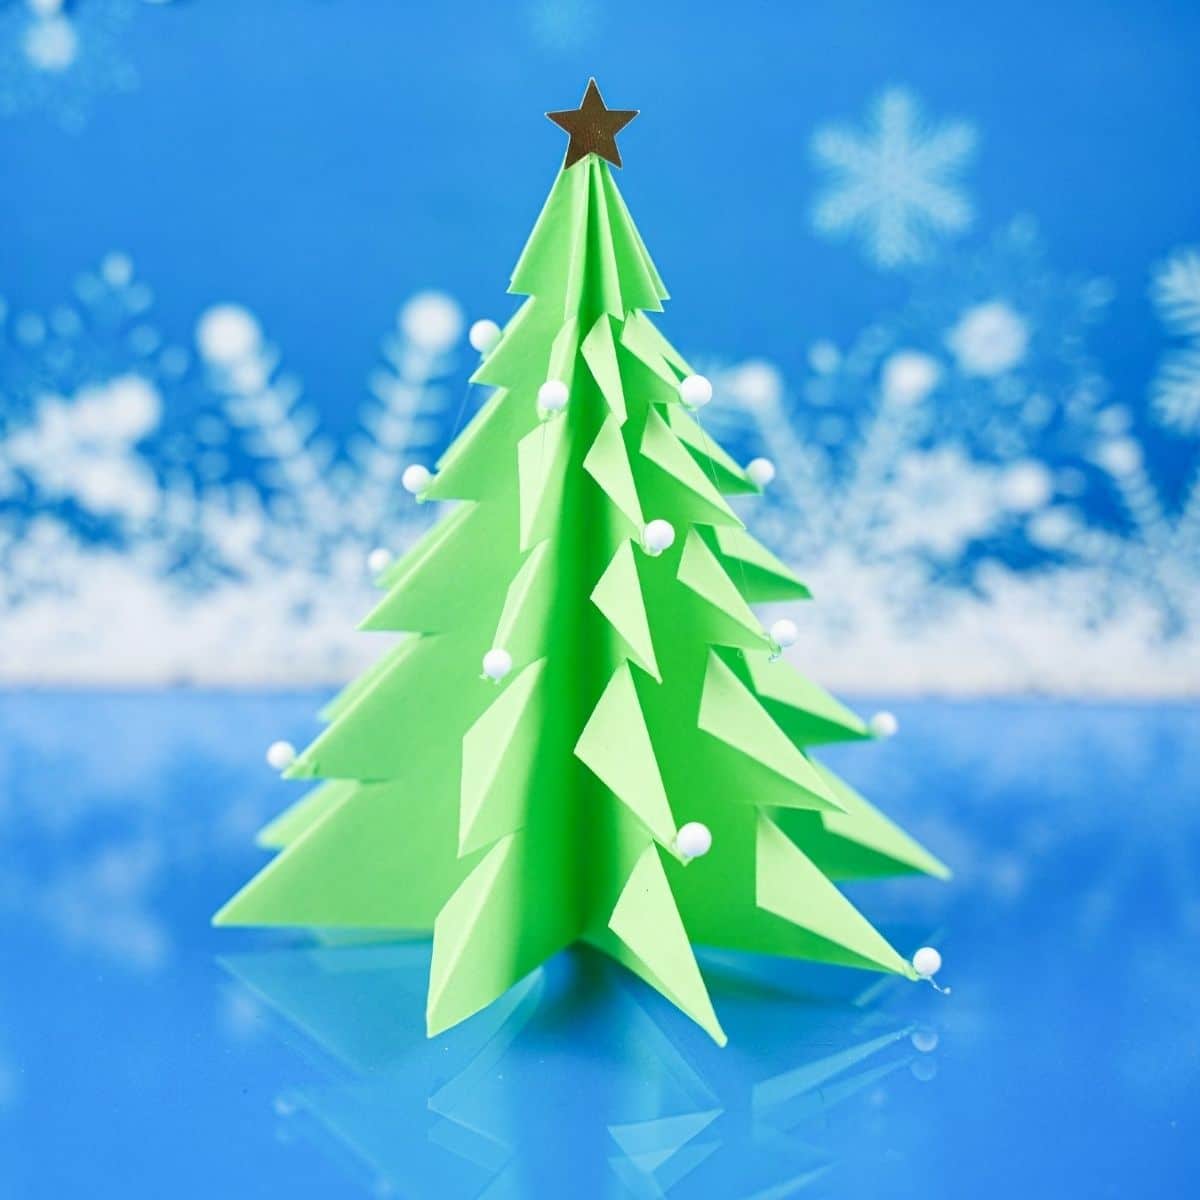 blue snow background behind green paper tree